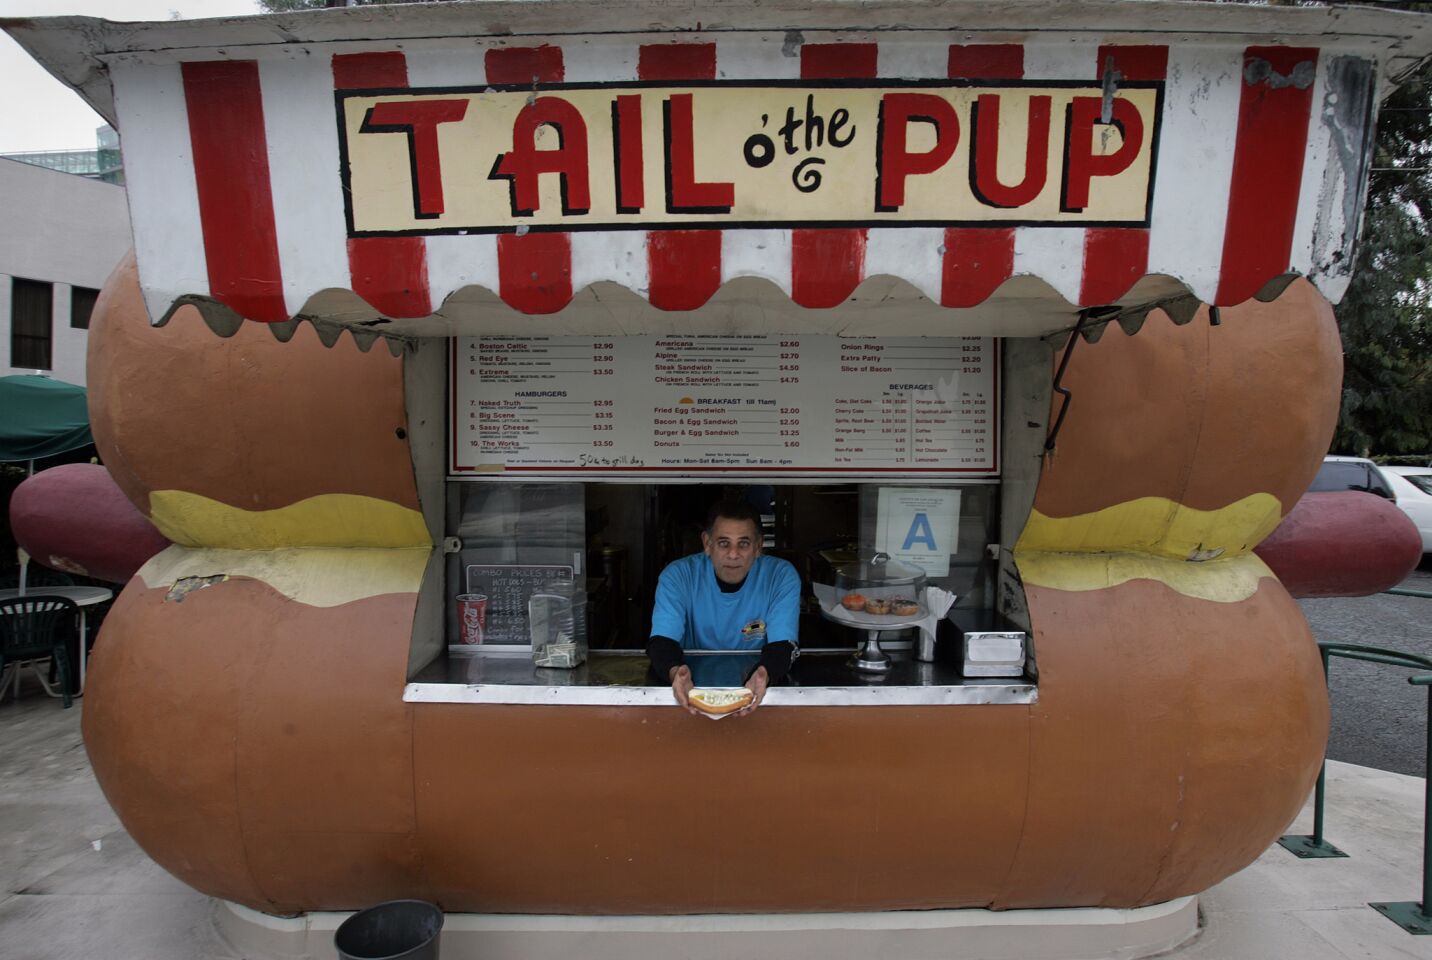 Dennis Blake, in 2005, worked at the Tail o' the Pup hot dog stand since 1976 with his father, Eddie Blake, (not pictured).